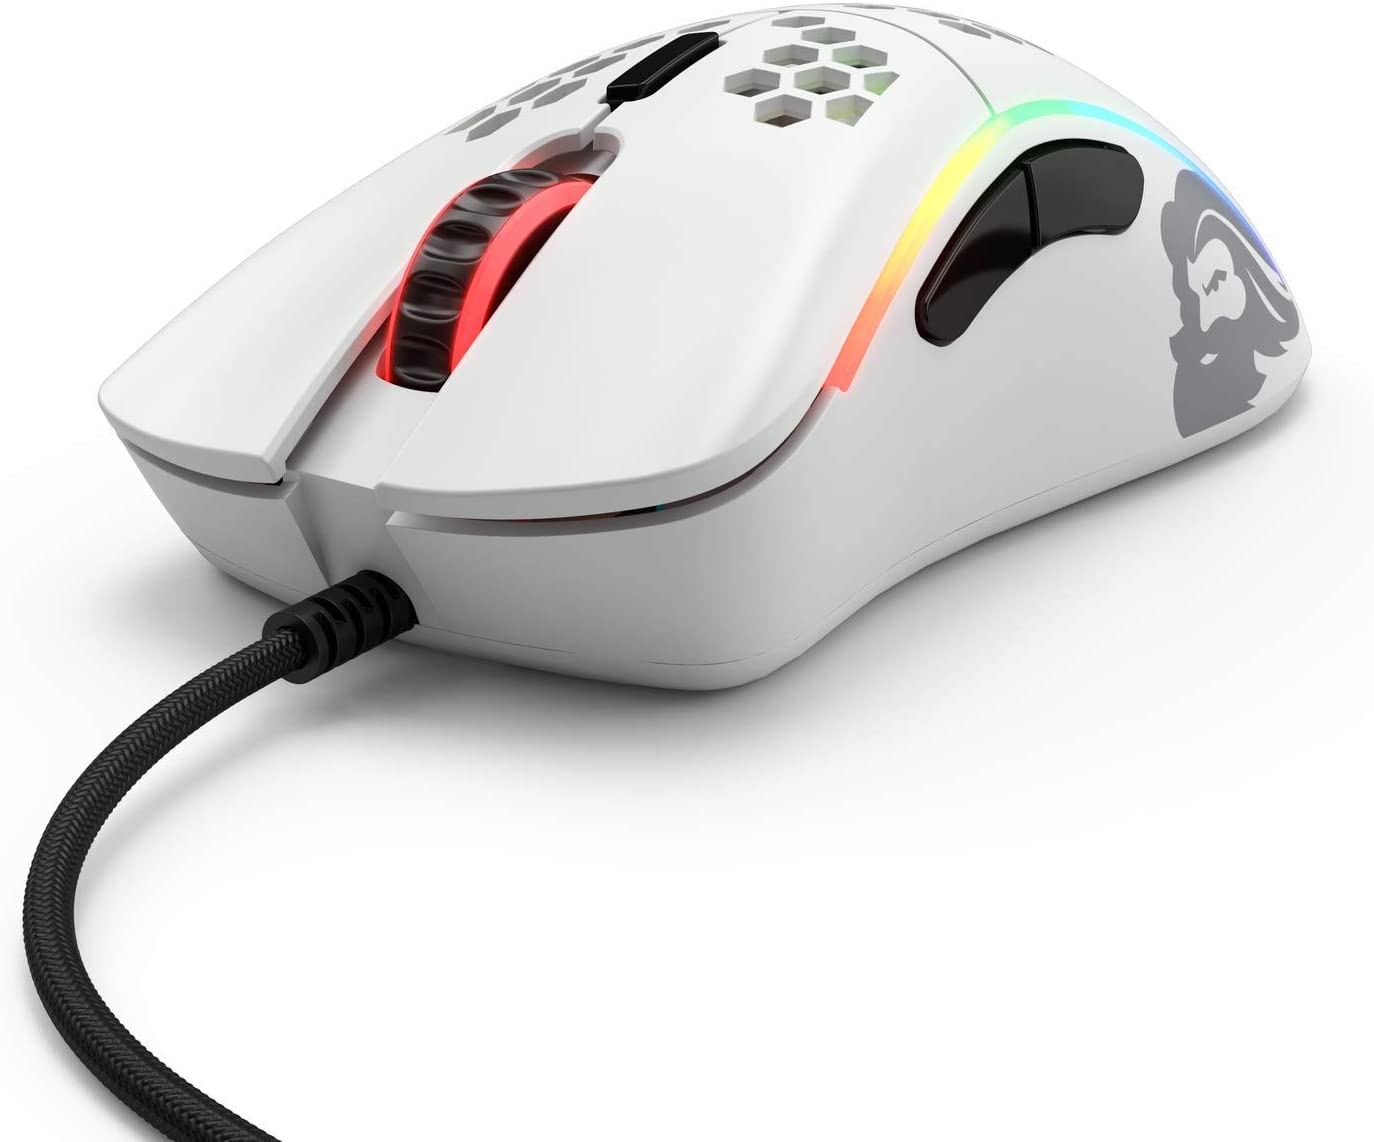 GLORIOUS MODEL D MINUS GAMING MOUSE (MATTE WHITE) - GLO-MS-DM-MW